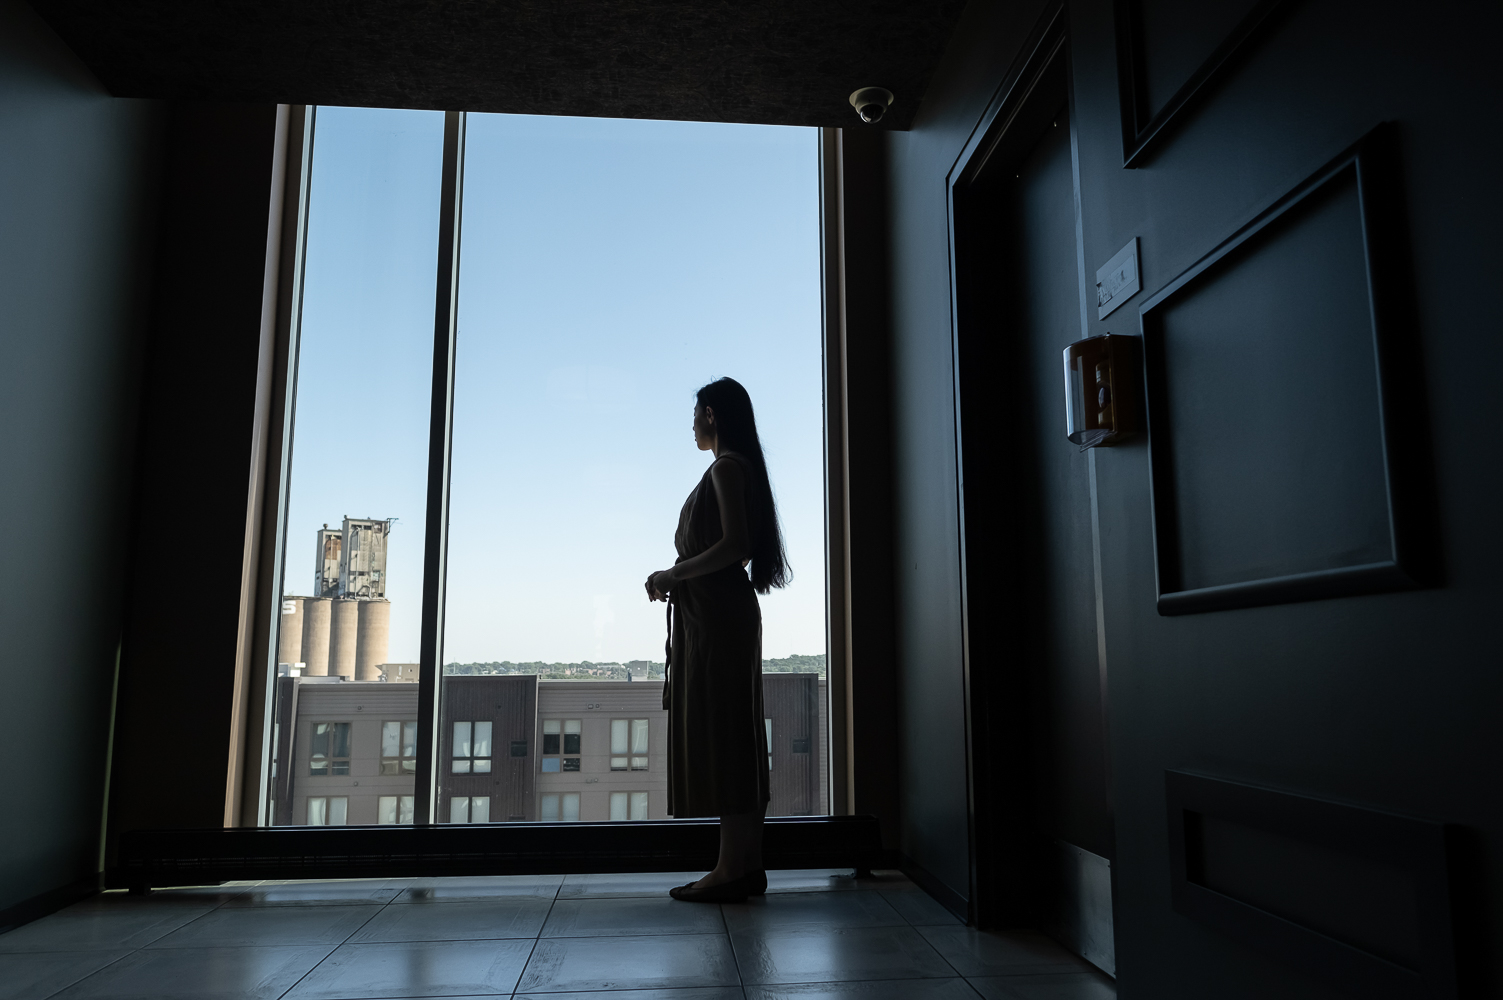 Jiangyao Liu, 21, of Minneapolis, poses for a portrait in Minneapolis, MN on August 4, 2019. Liu, a student at the University of Minnesota, alleges Chinese company JD.com CEO Richard Liu raped her in August, 2018, and has filed a lawsuit.